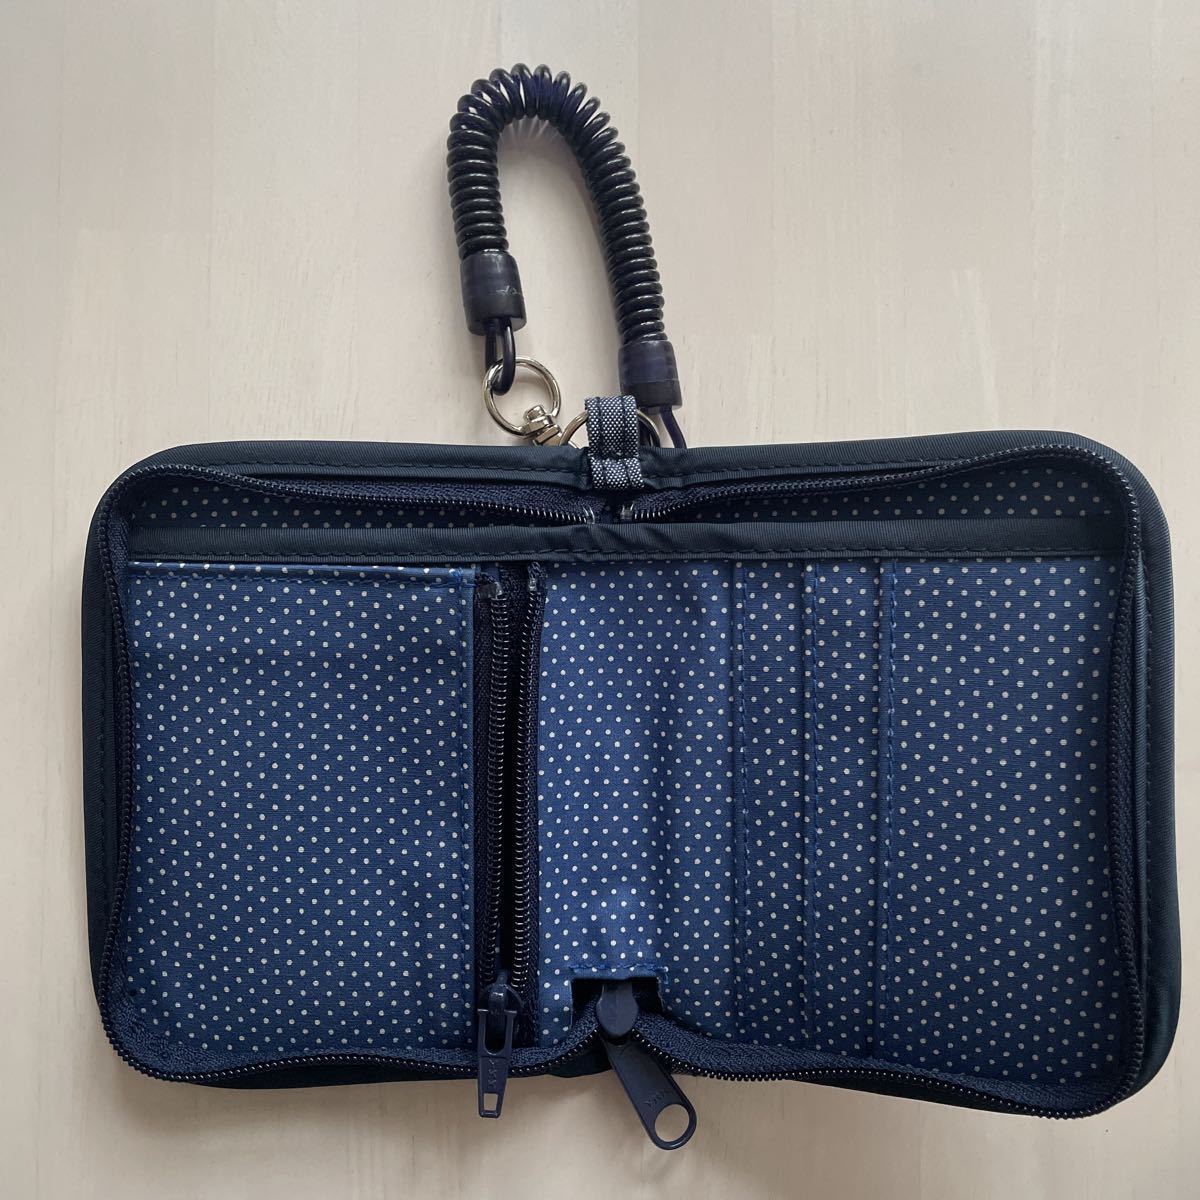  new goods Familia purse pass case familiar navy blue color popular complete sale goods records out of production rare new . period preparation also 